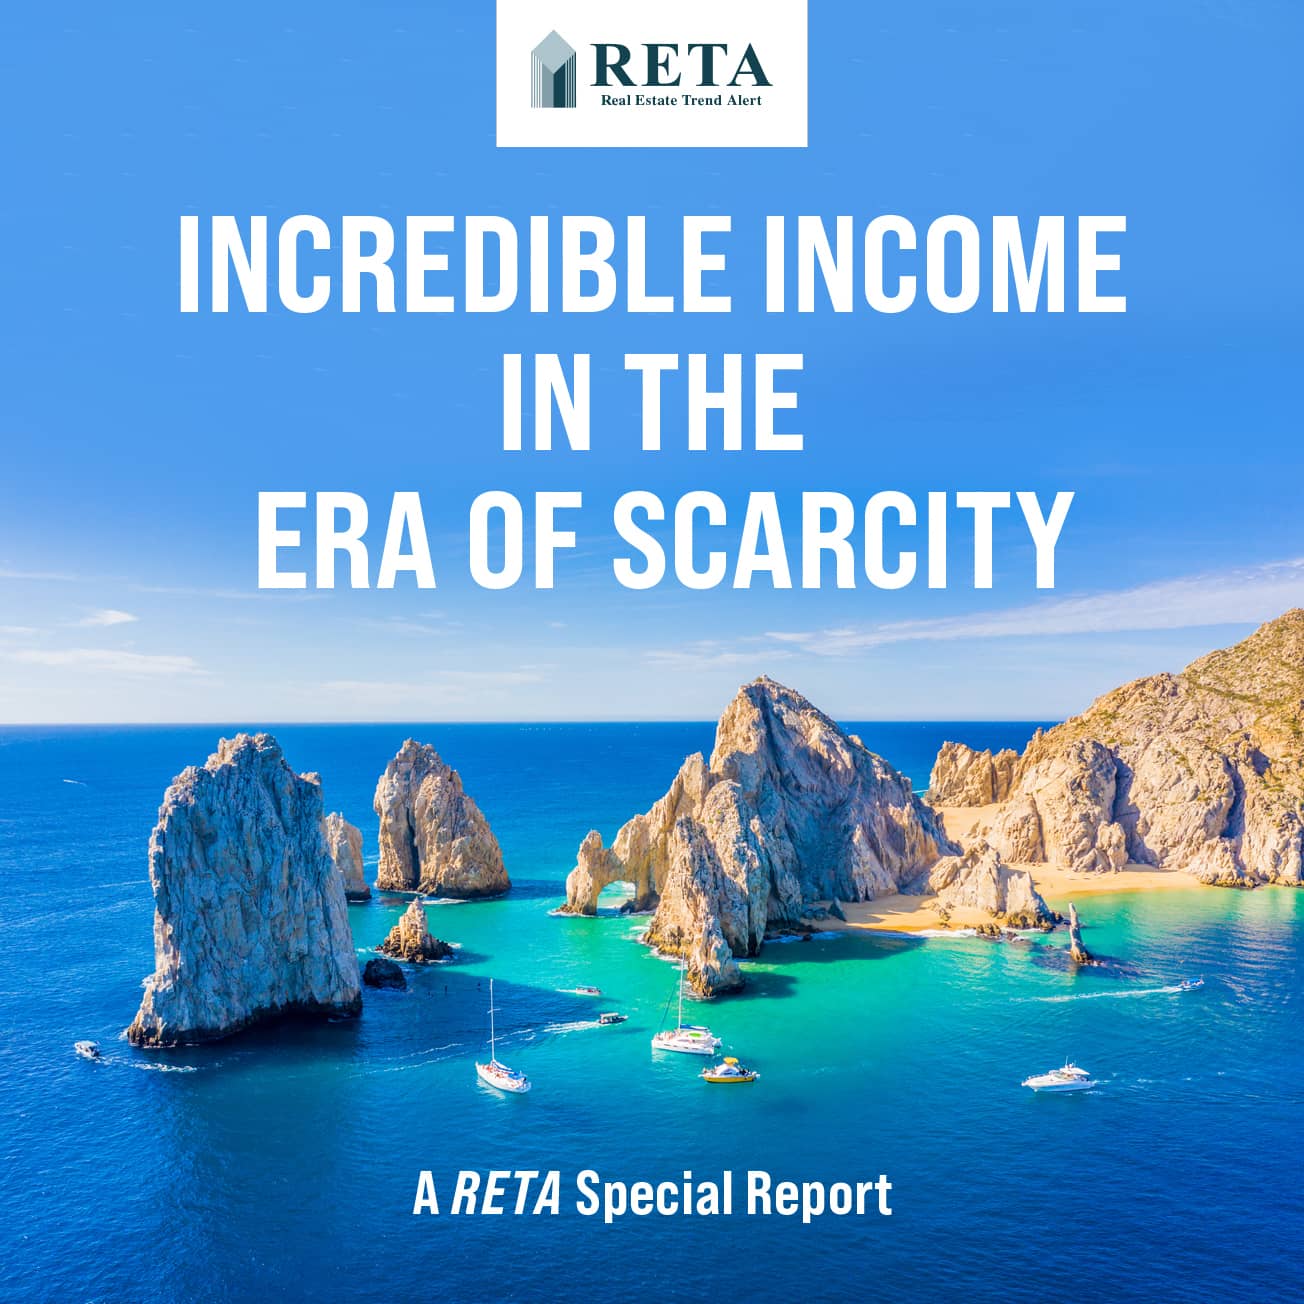 Incredible Income in the Era of Scarcity